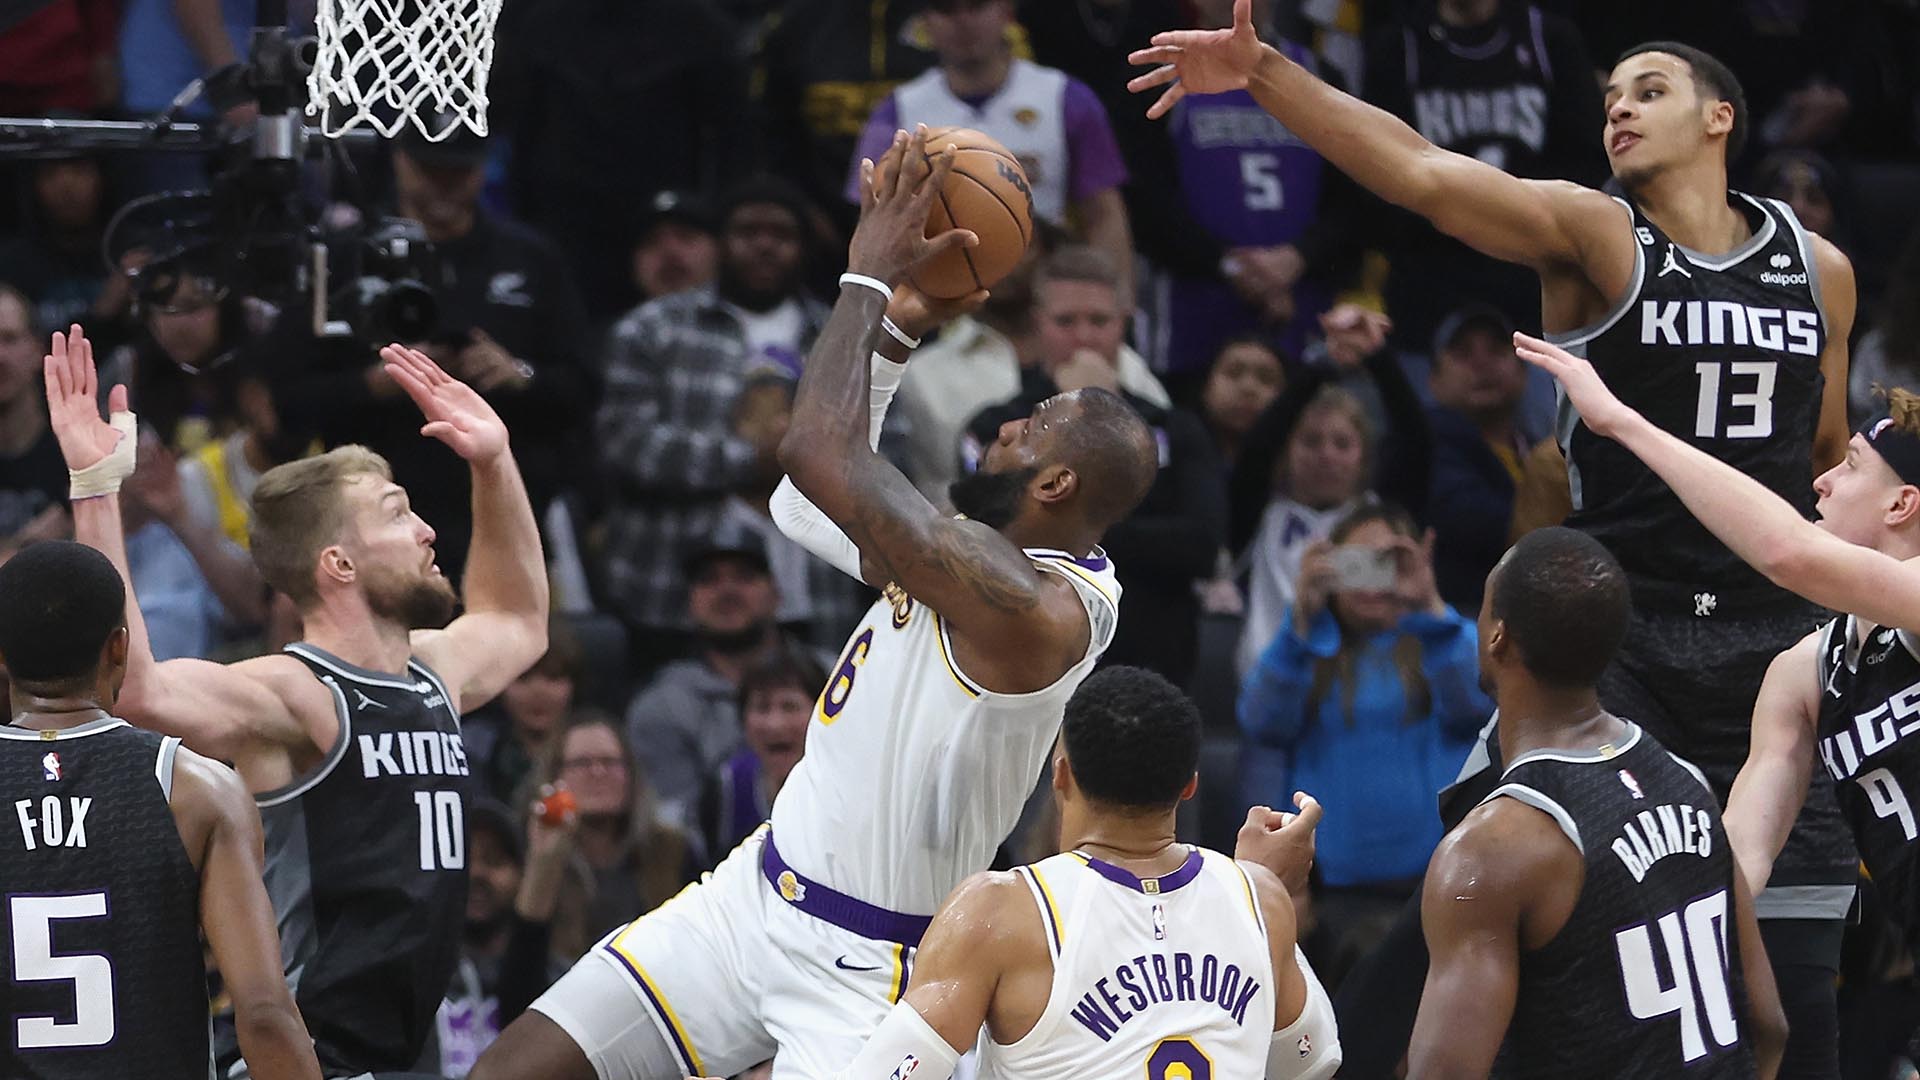 Los Angeles Lakers Preview - NBA Team Previews 2022-23